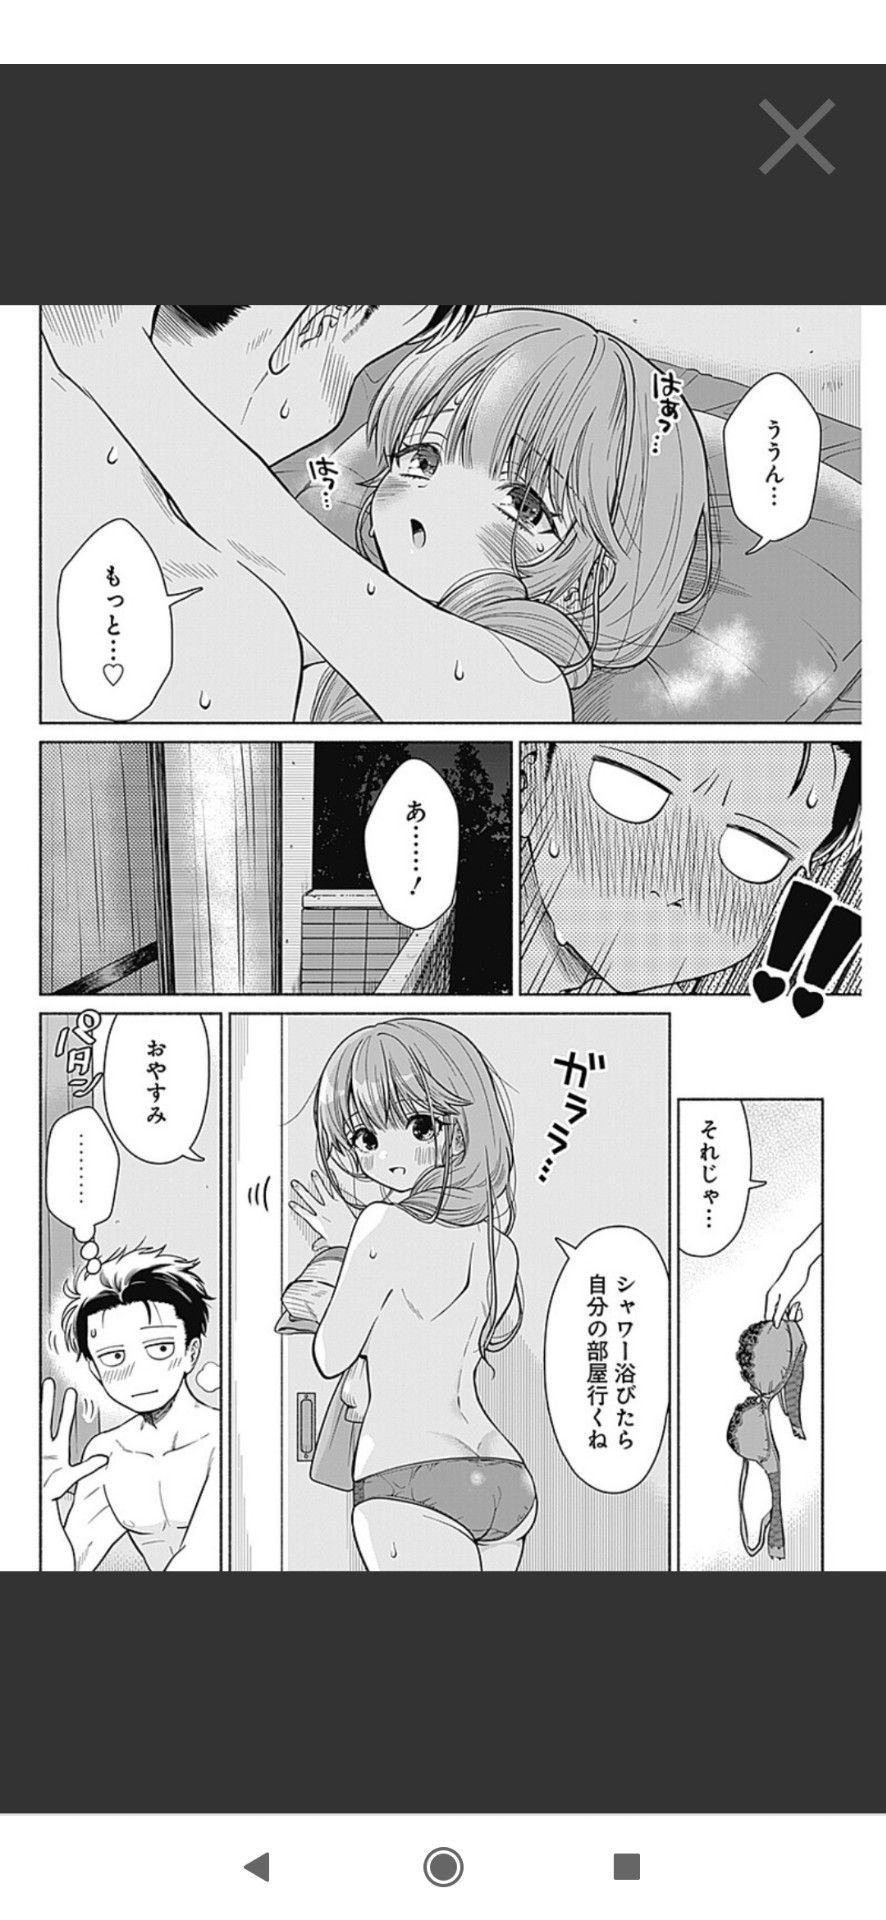 【Image】 A love comedy comic book in which an old man over 30 is enthusiastic is talked about as too much of a kimo ... 6